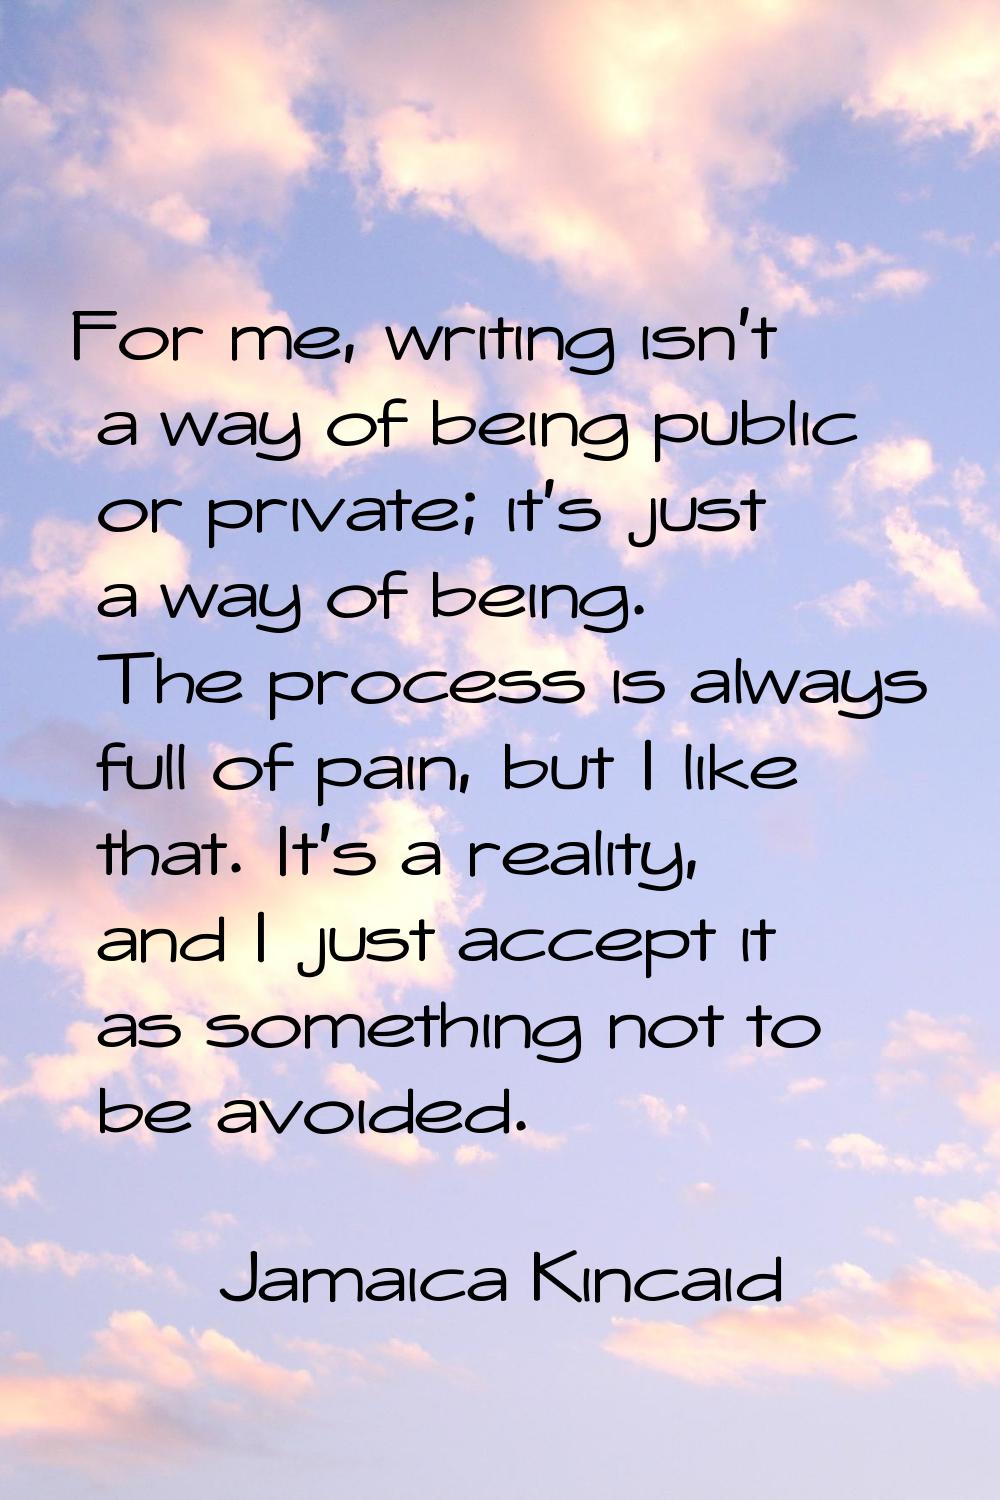 For me, writing isn't a way of being public or private; it's just a way of being. The process is al